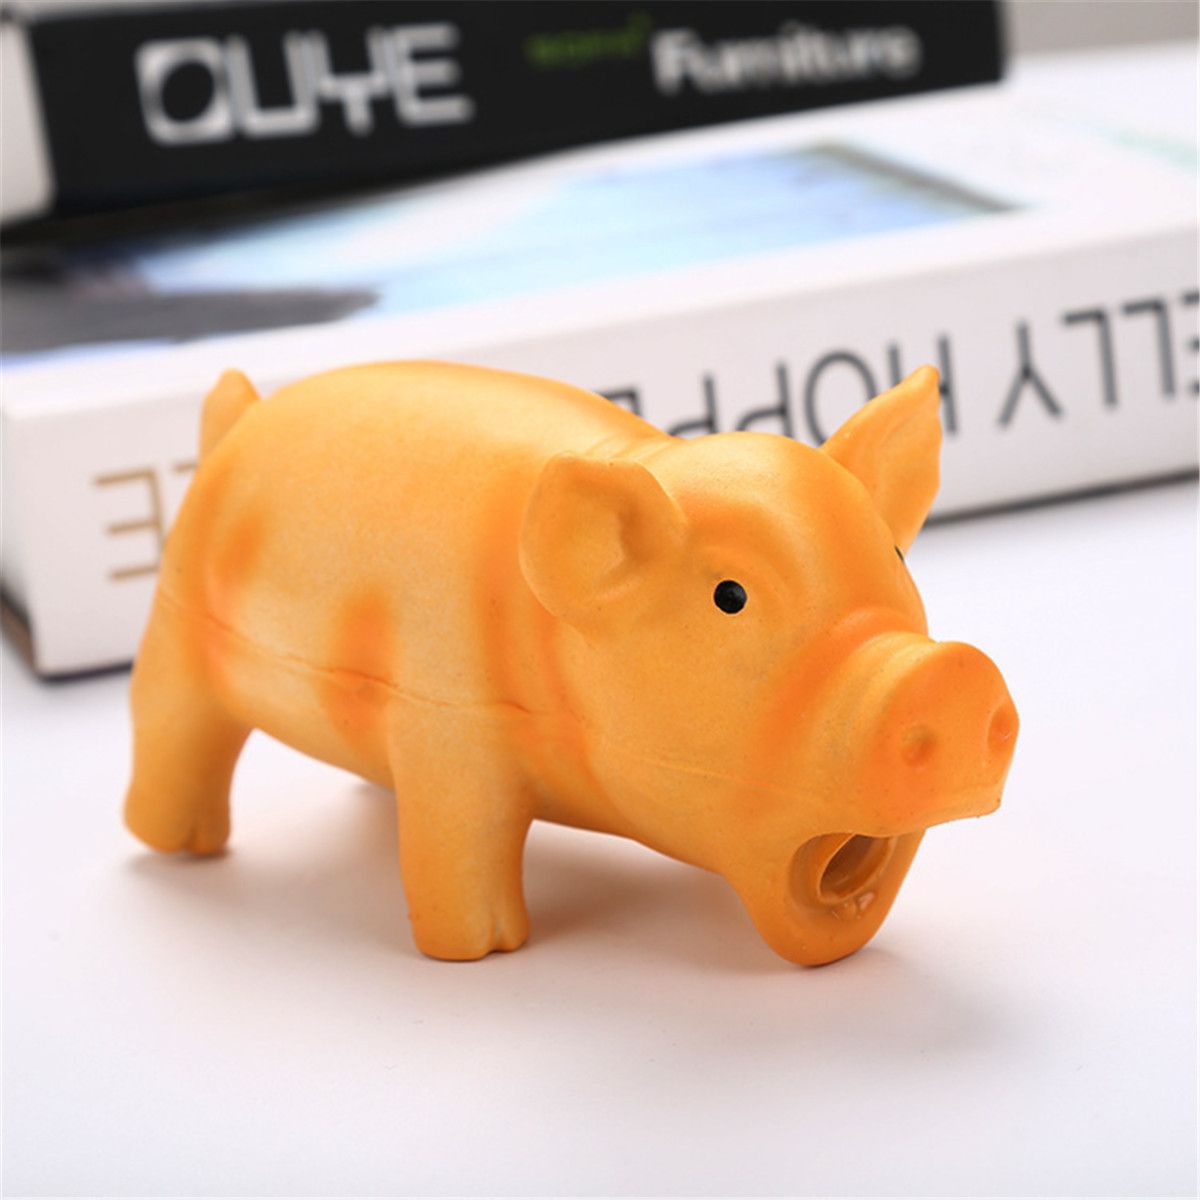 Latex-Pig-Shape-Toy-Grunting-Sound-Dog-Puppy-Chewing-Squeaker-Pet-Funny-Playing-Toys-1583107